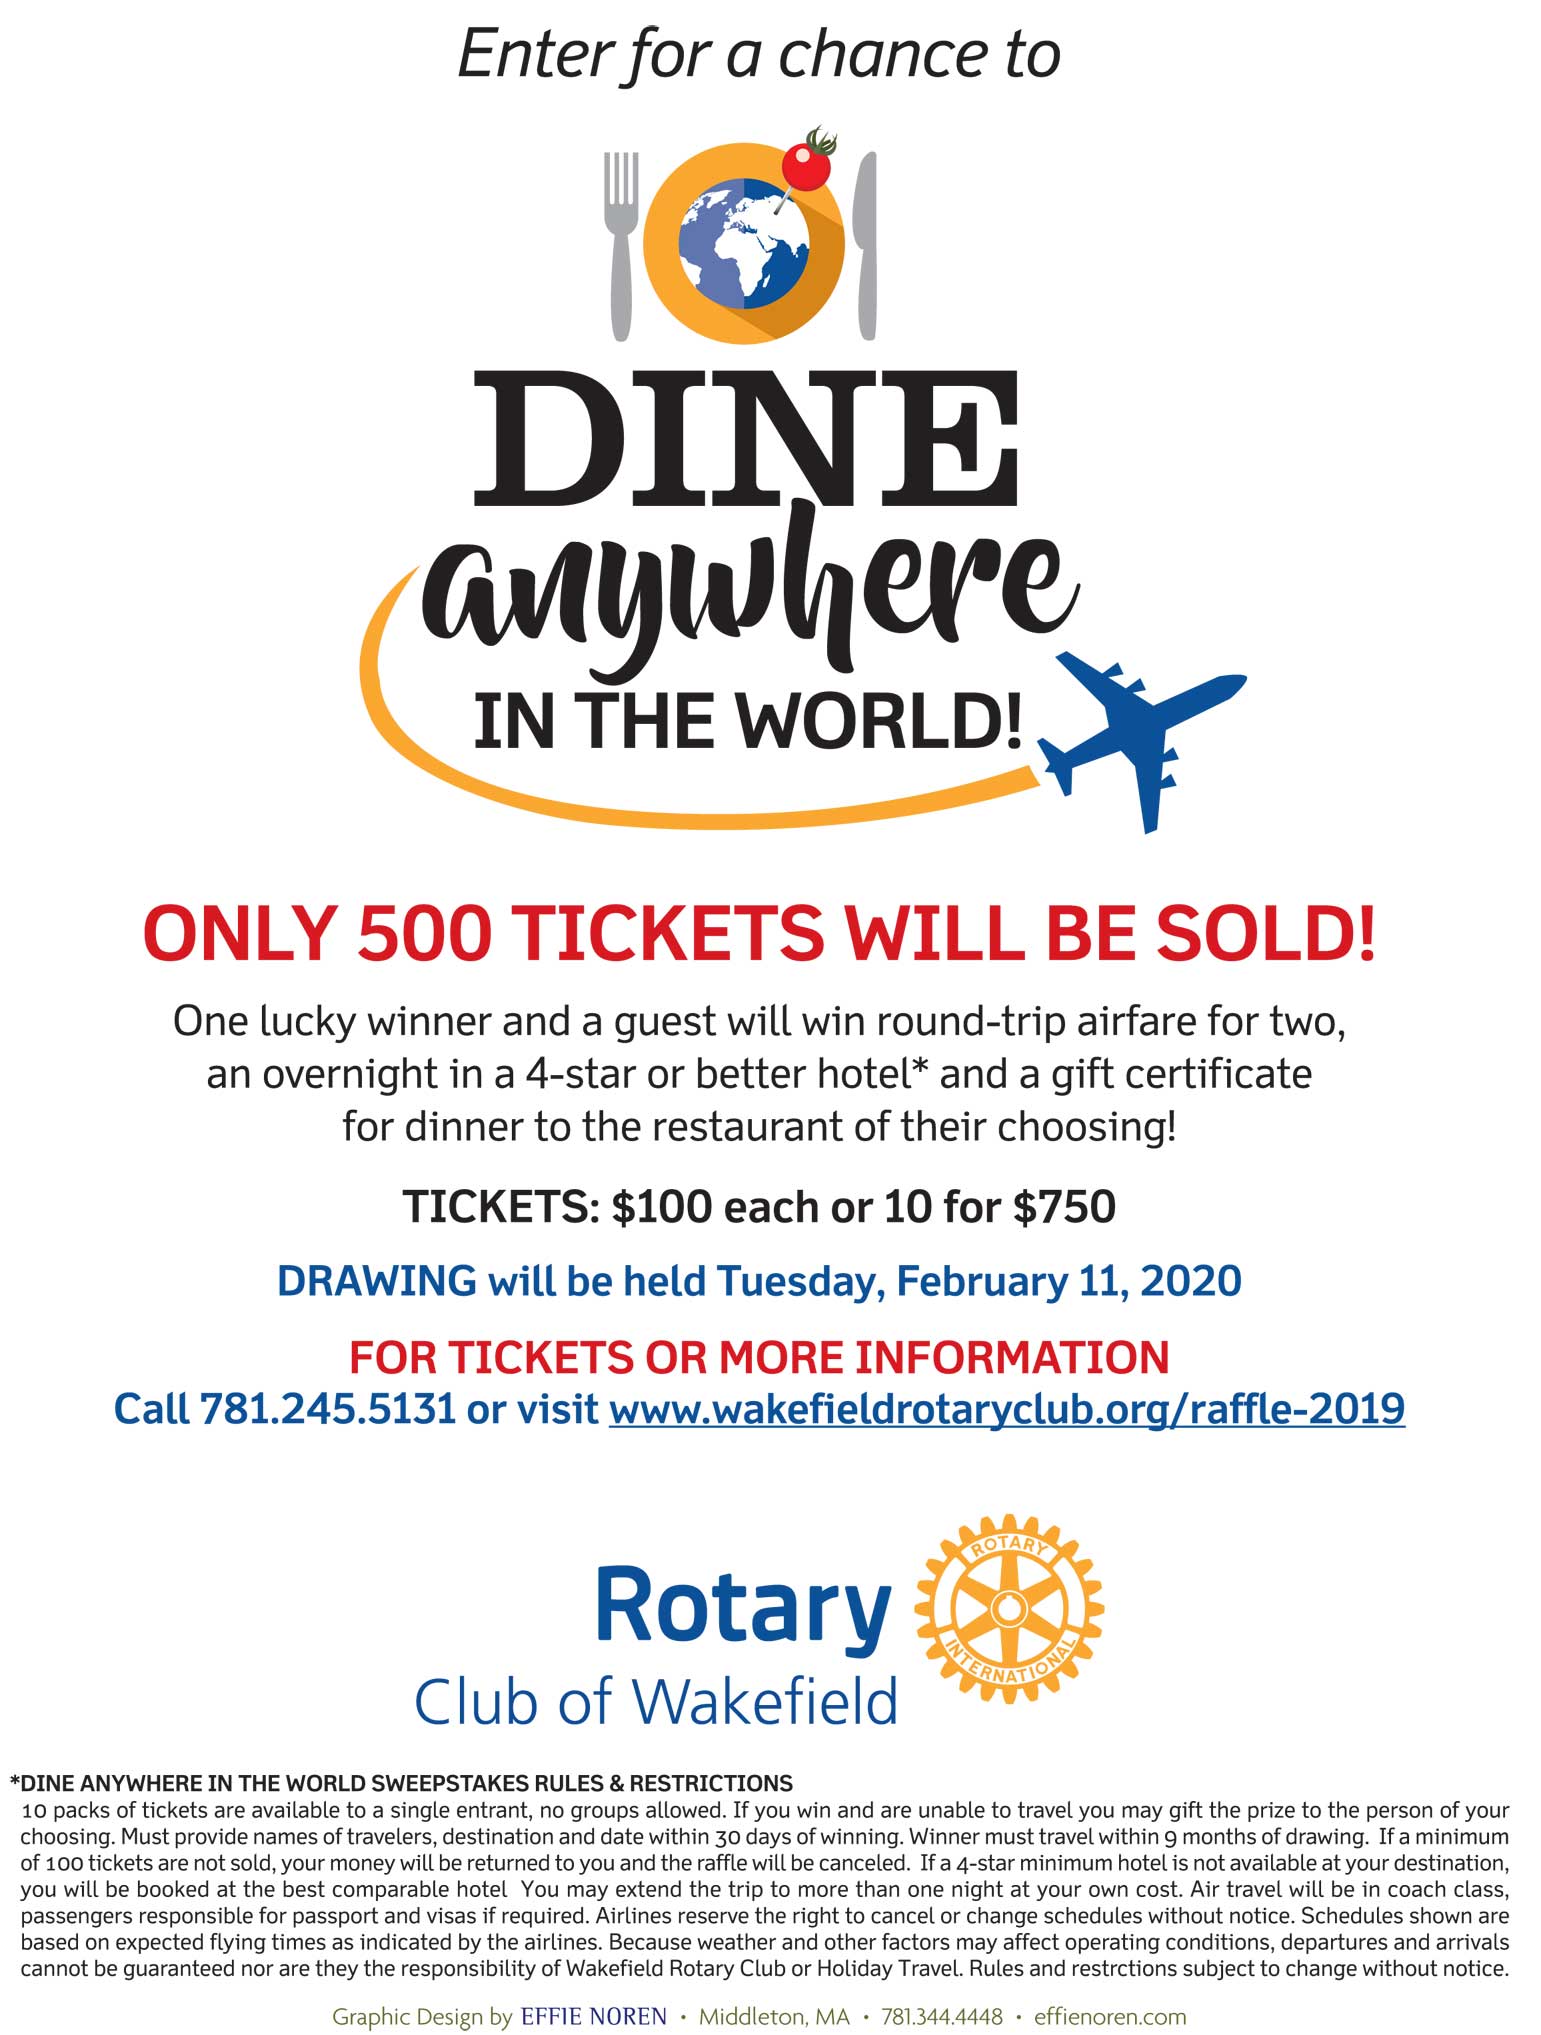 DINE ANYWHERE IN THE WORLD SWEEPSTAKES